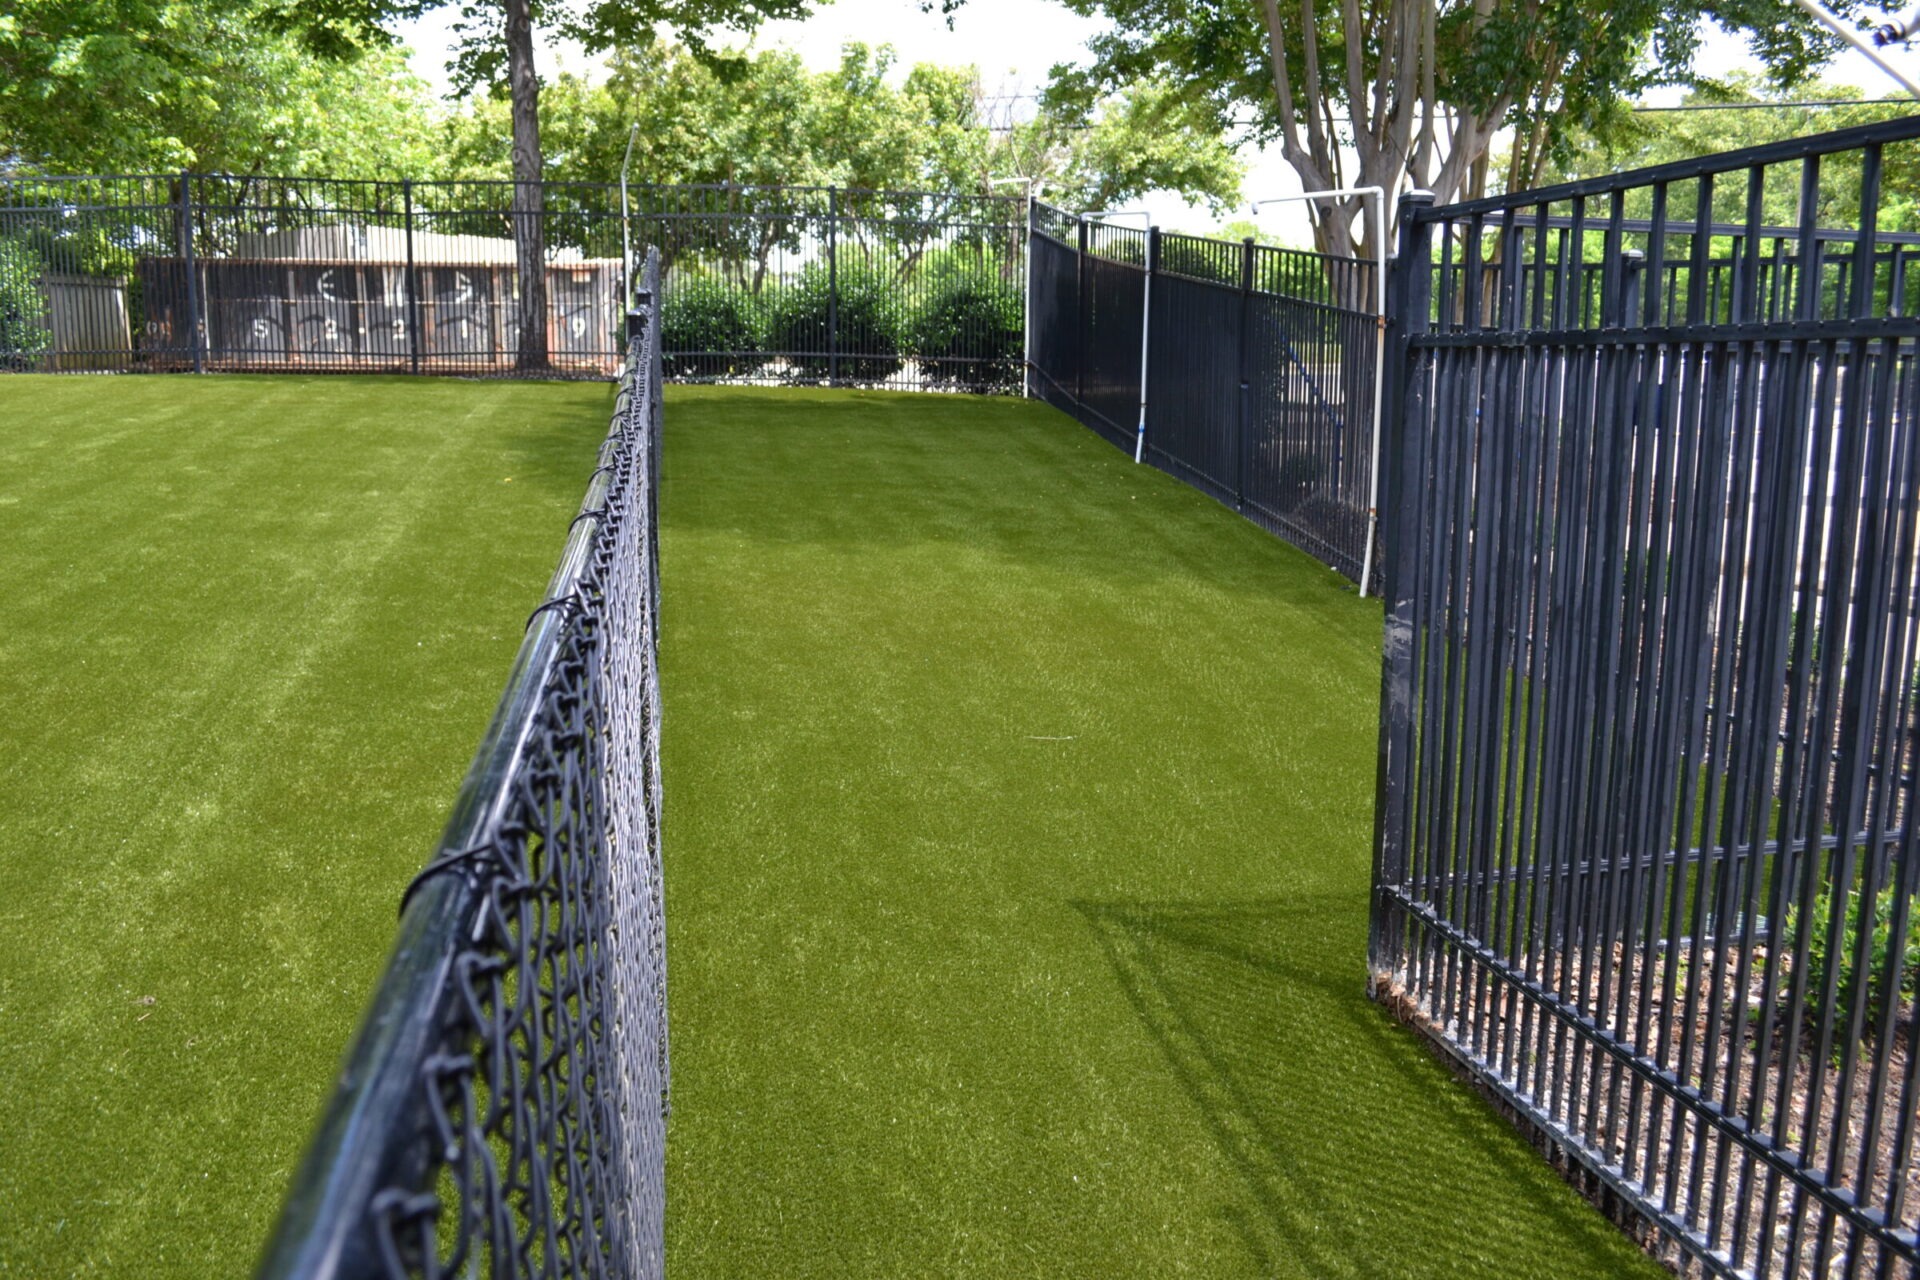 An empty fenced area with green artificial turf, surrounded by black metal fences, with trees and a building visible in the background.